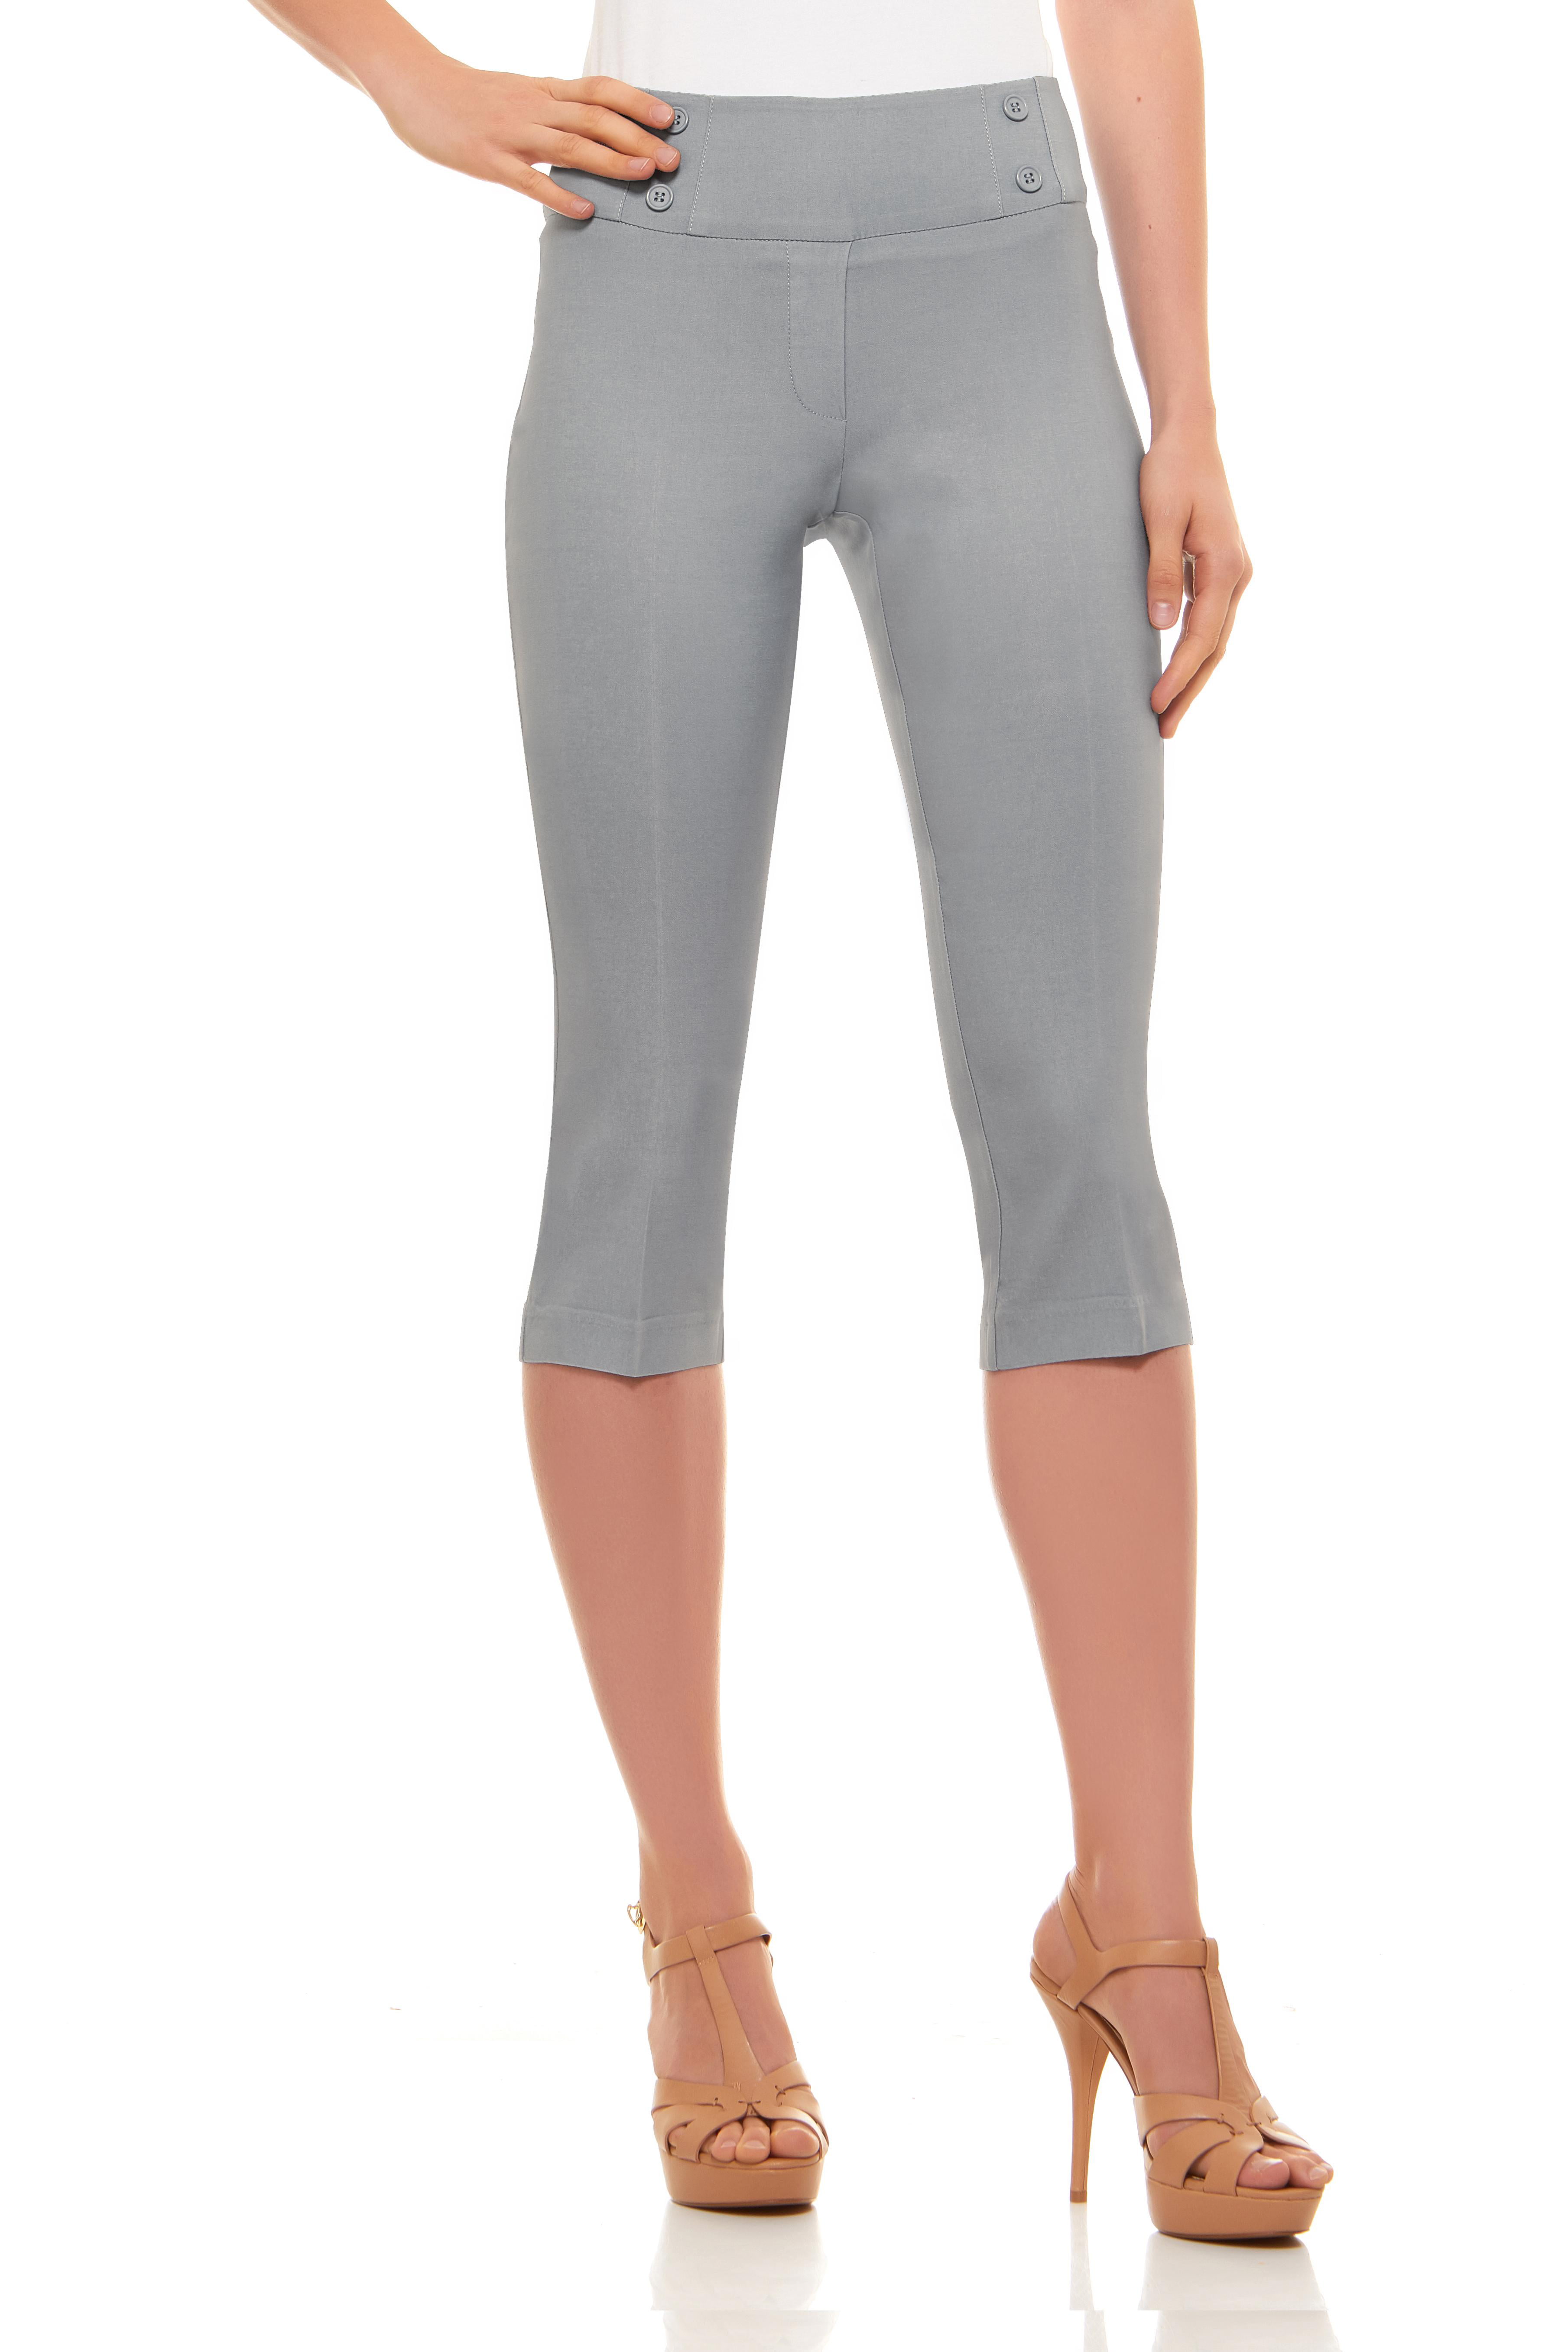 Velucci - Womens Classic Fit Capri Pants - Comfortable Pull On Style ...